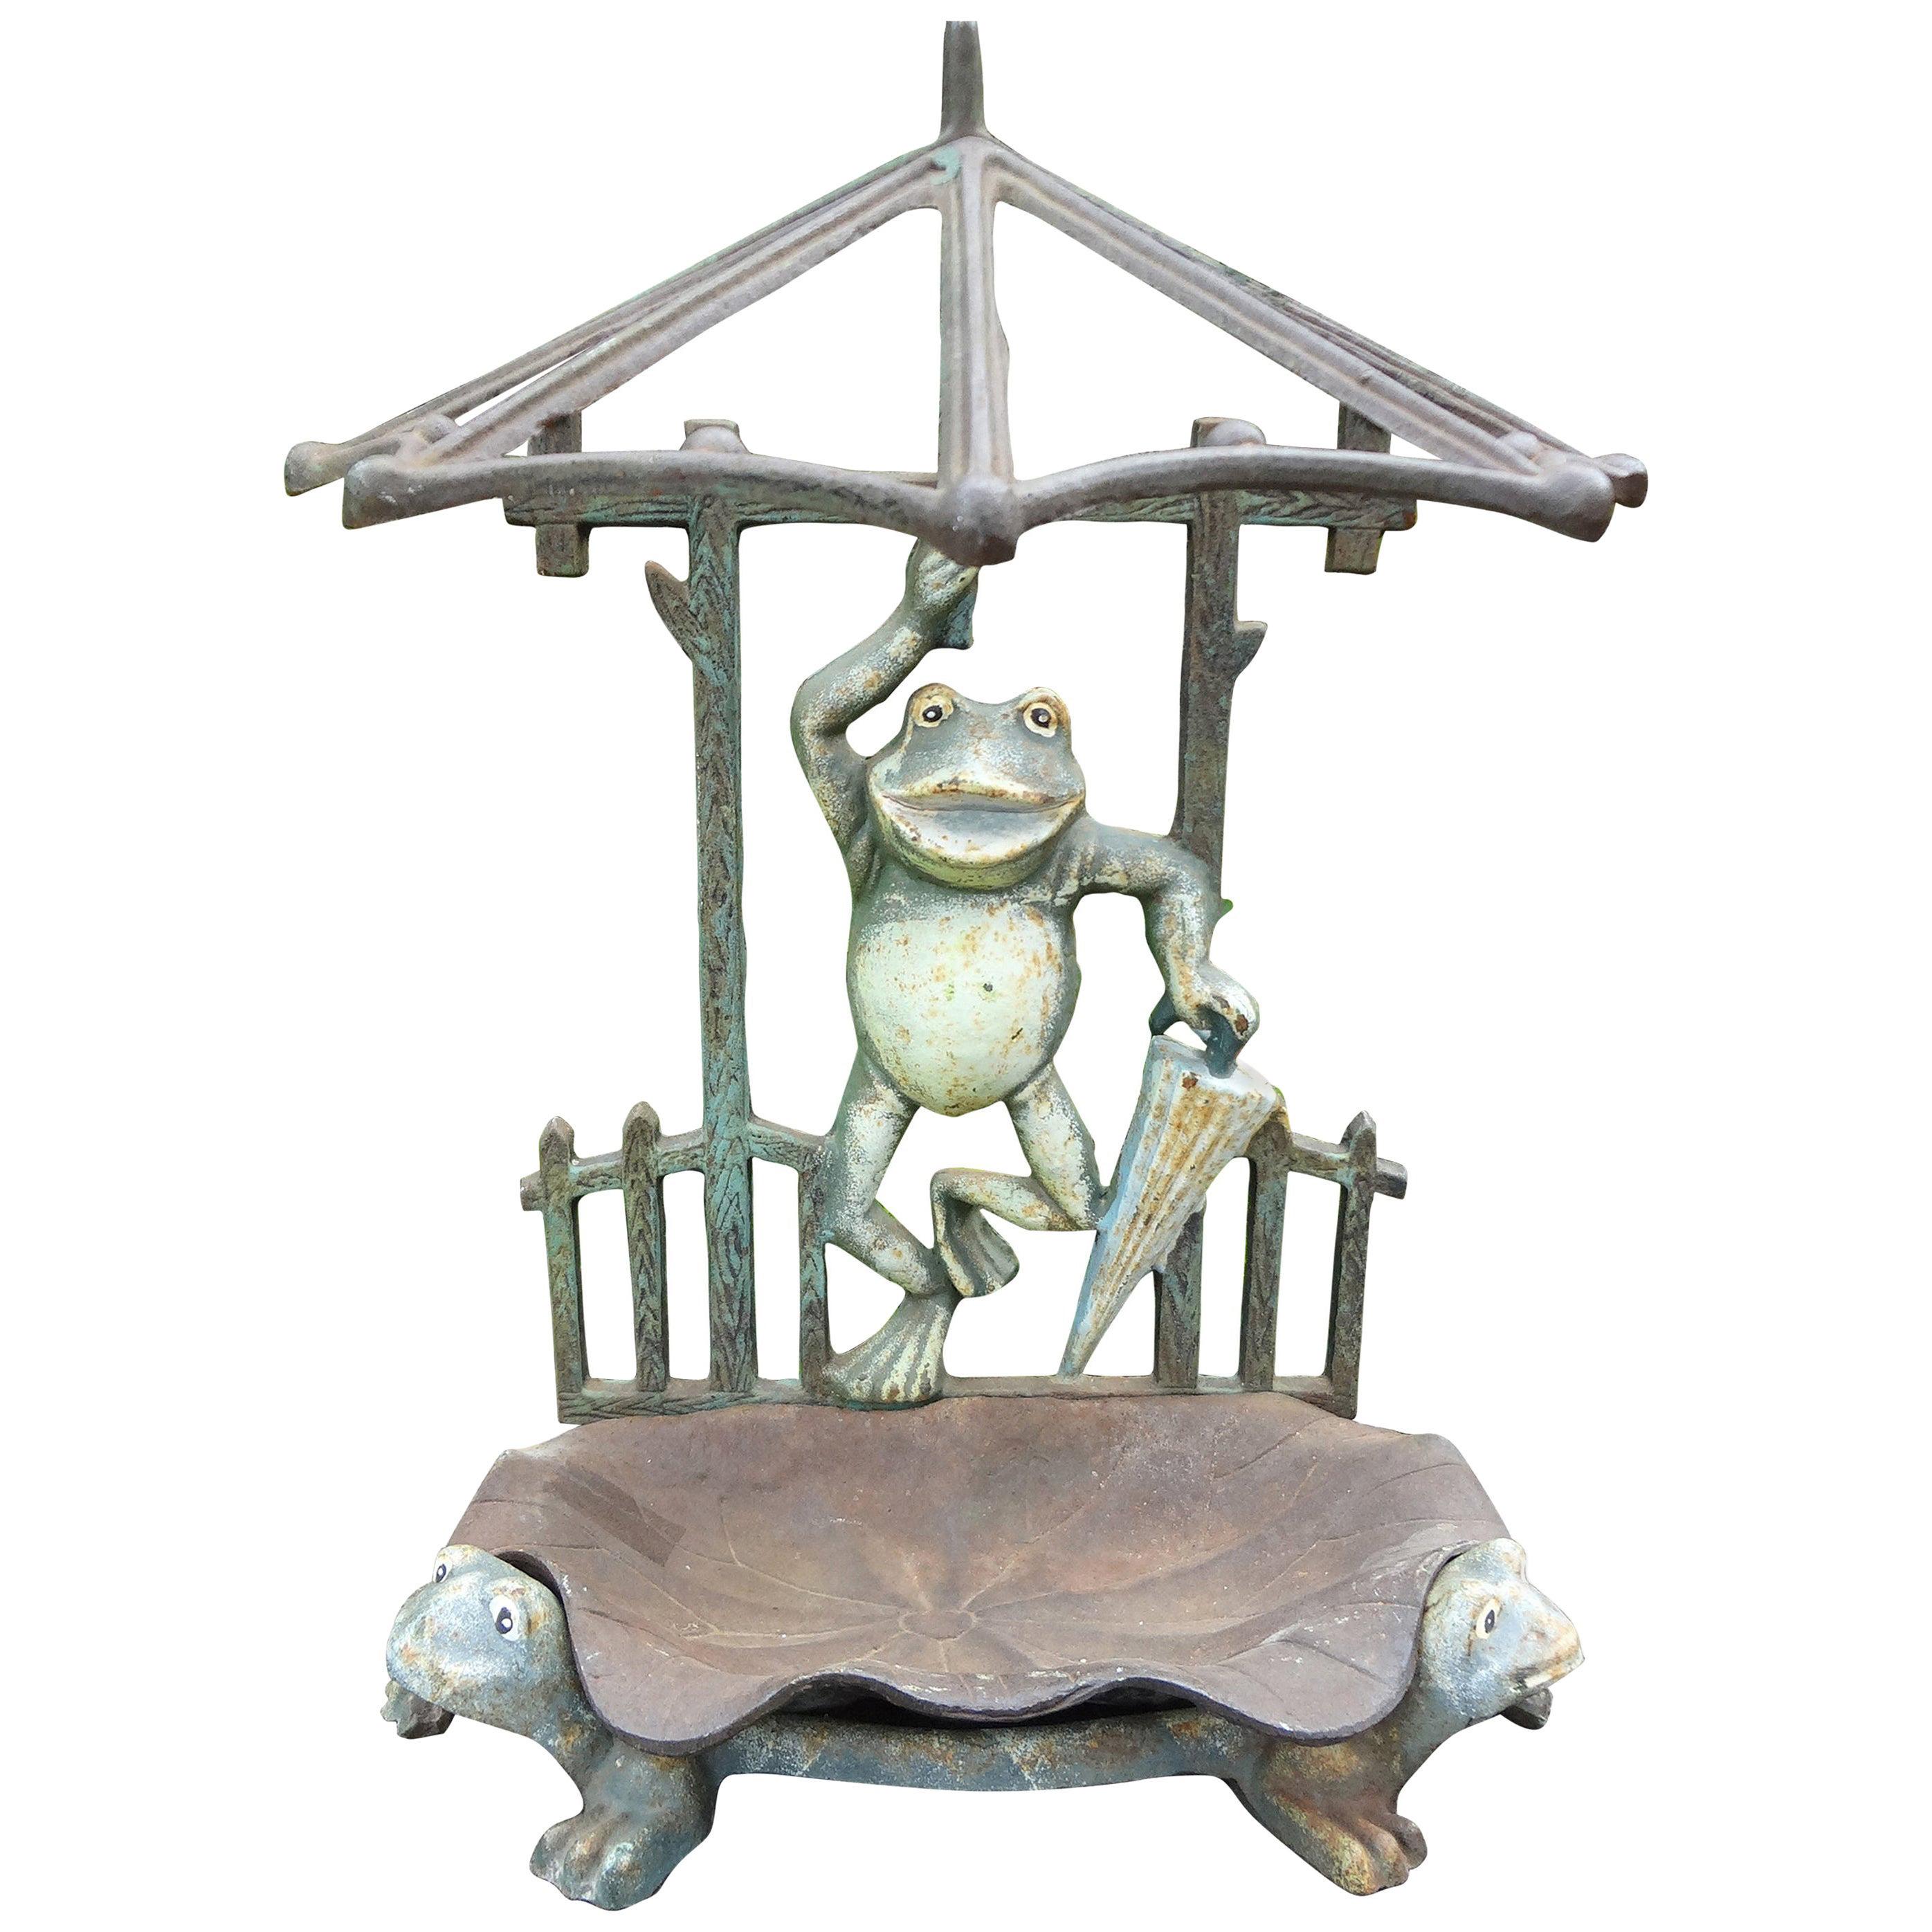 French Art Nouveau Iron Umbrella Stand with Frogs